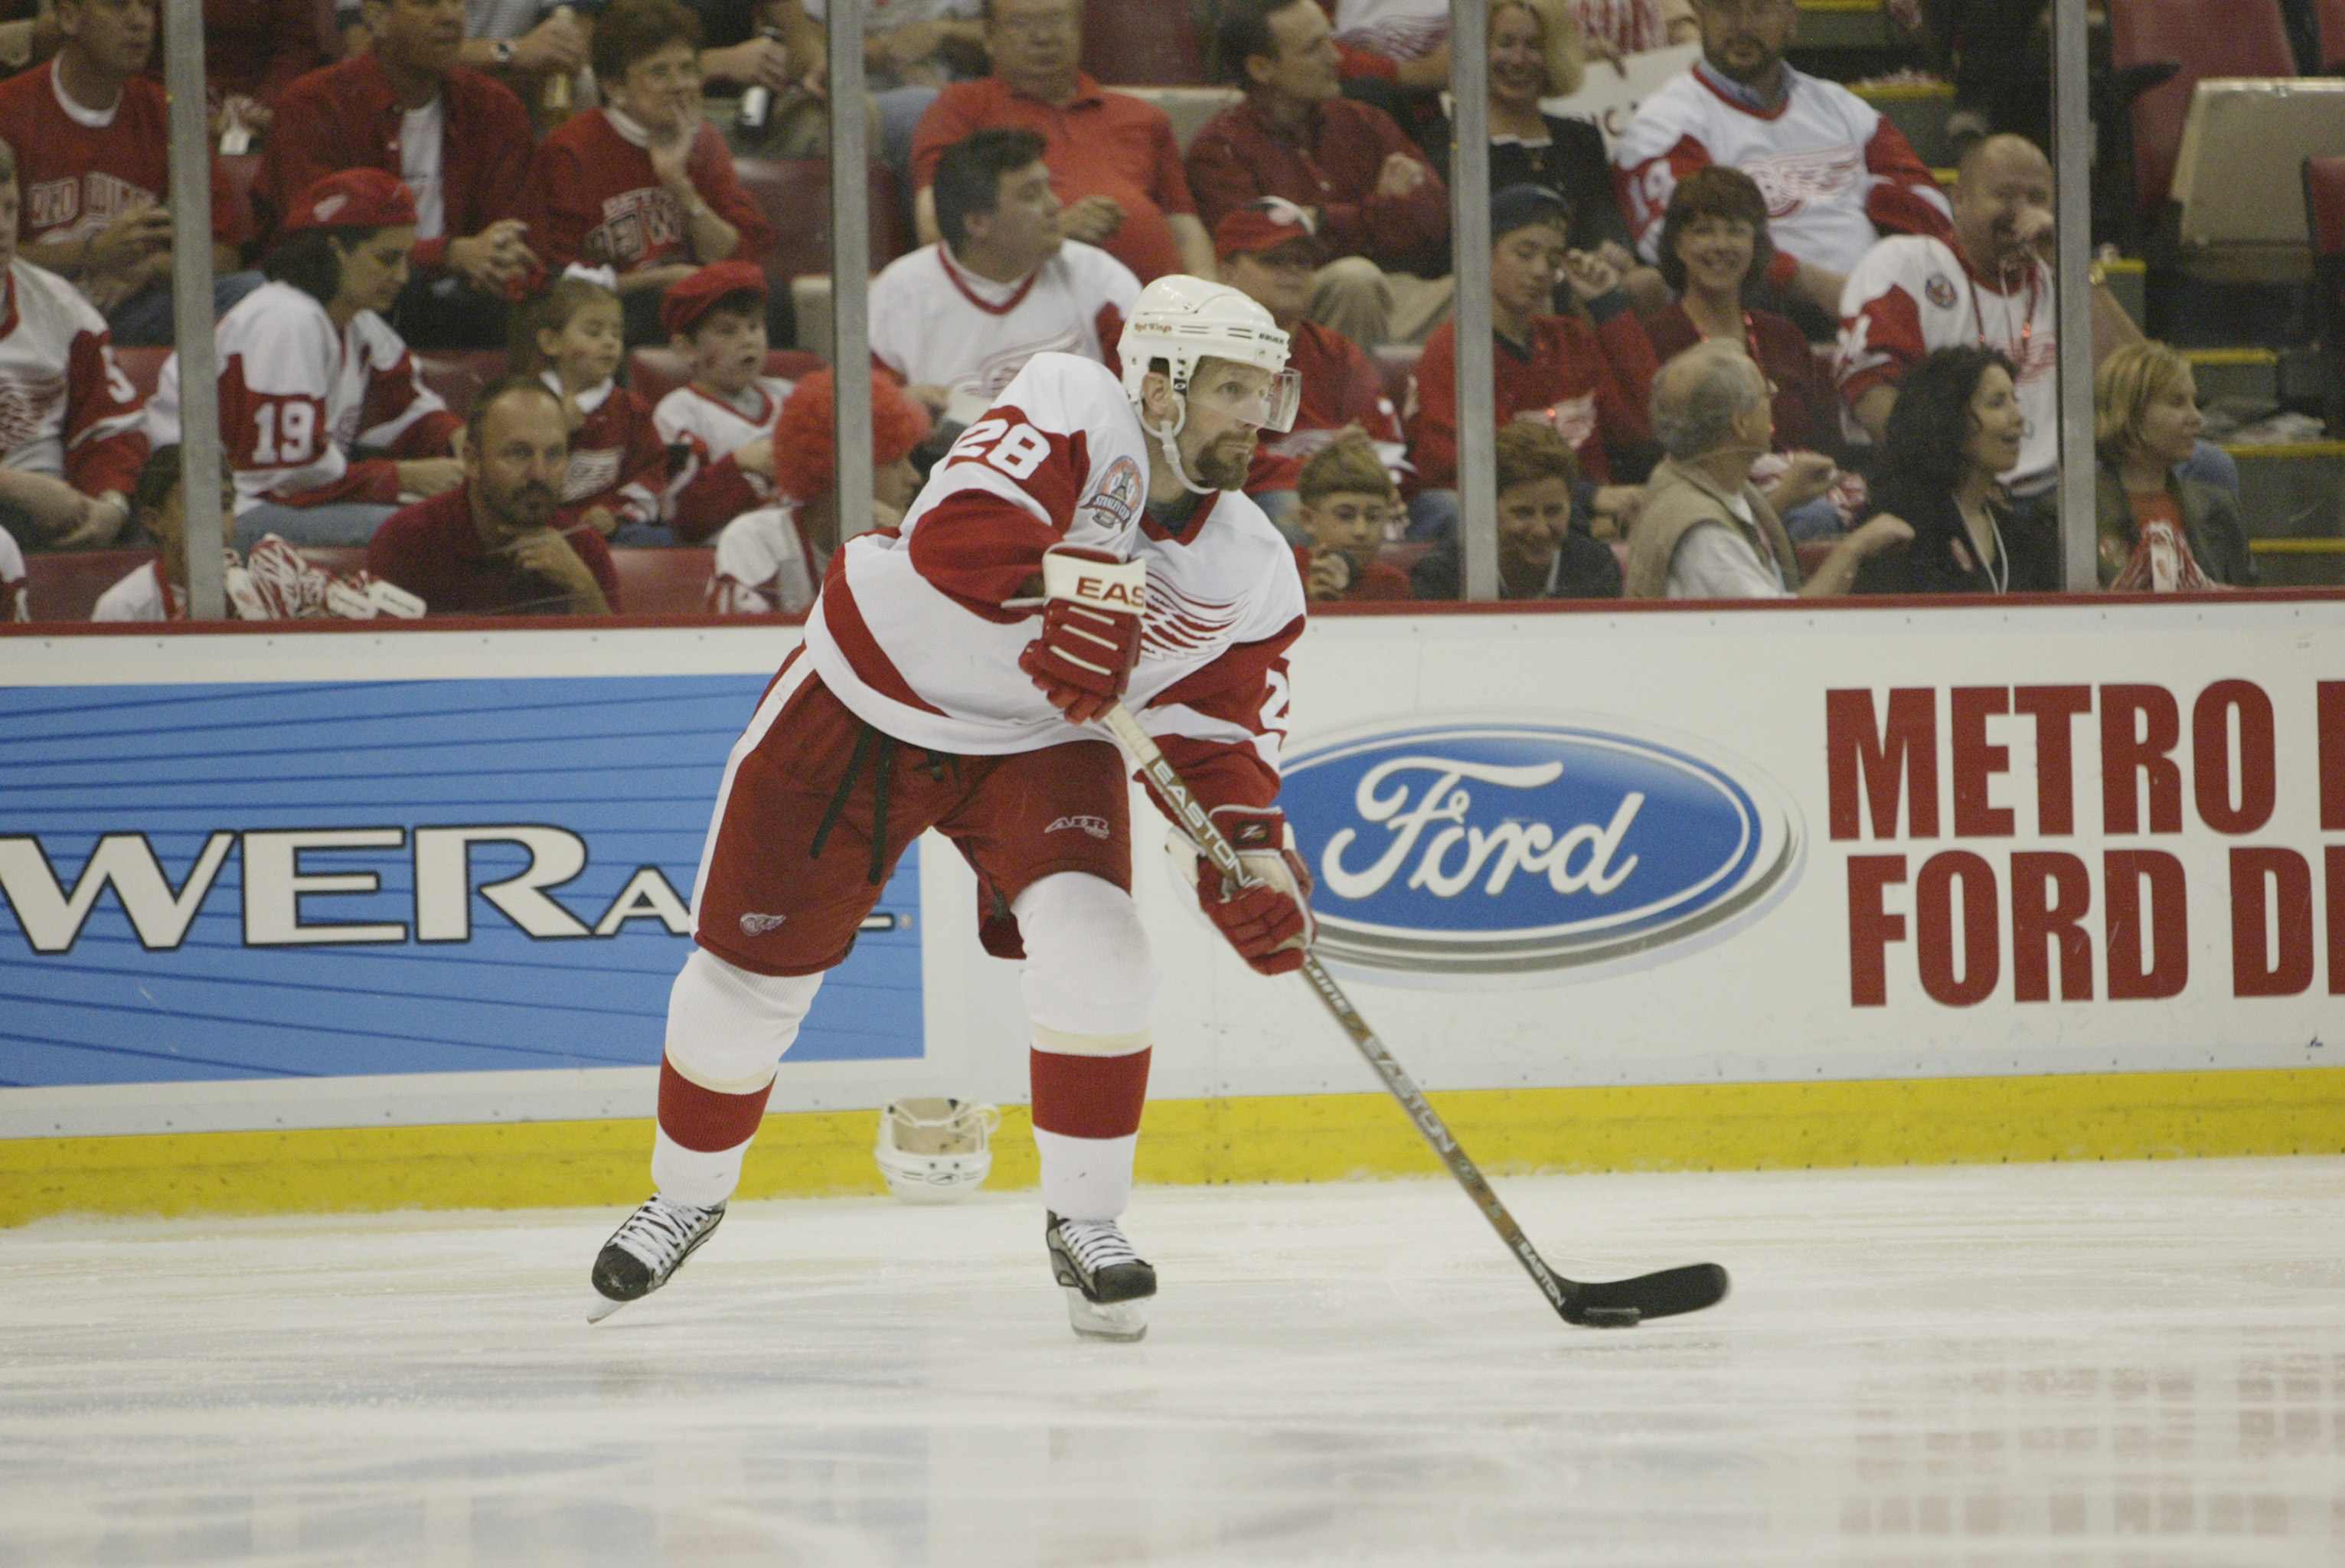 DETROIT, MI - JUNE 13:  Defenseman Steve Duchesne #28 of the Detroit Red Wings skates with the puck against the Carolina Hurricanes during game five of the NHL Stanley Cup Finals on June 13, 2002 at the Joe Louis Arena in Detroit, Michigan.  The Red Wings